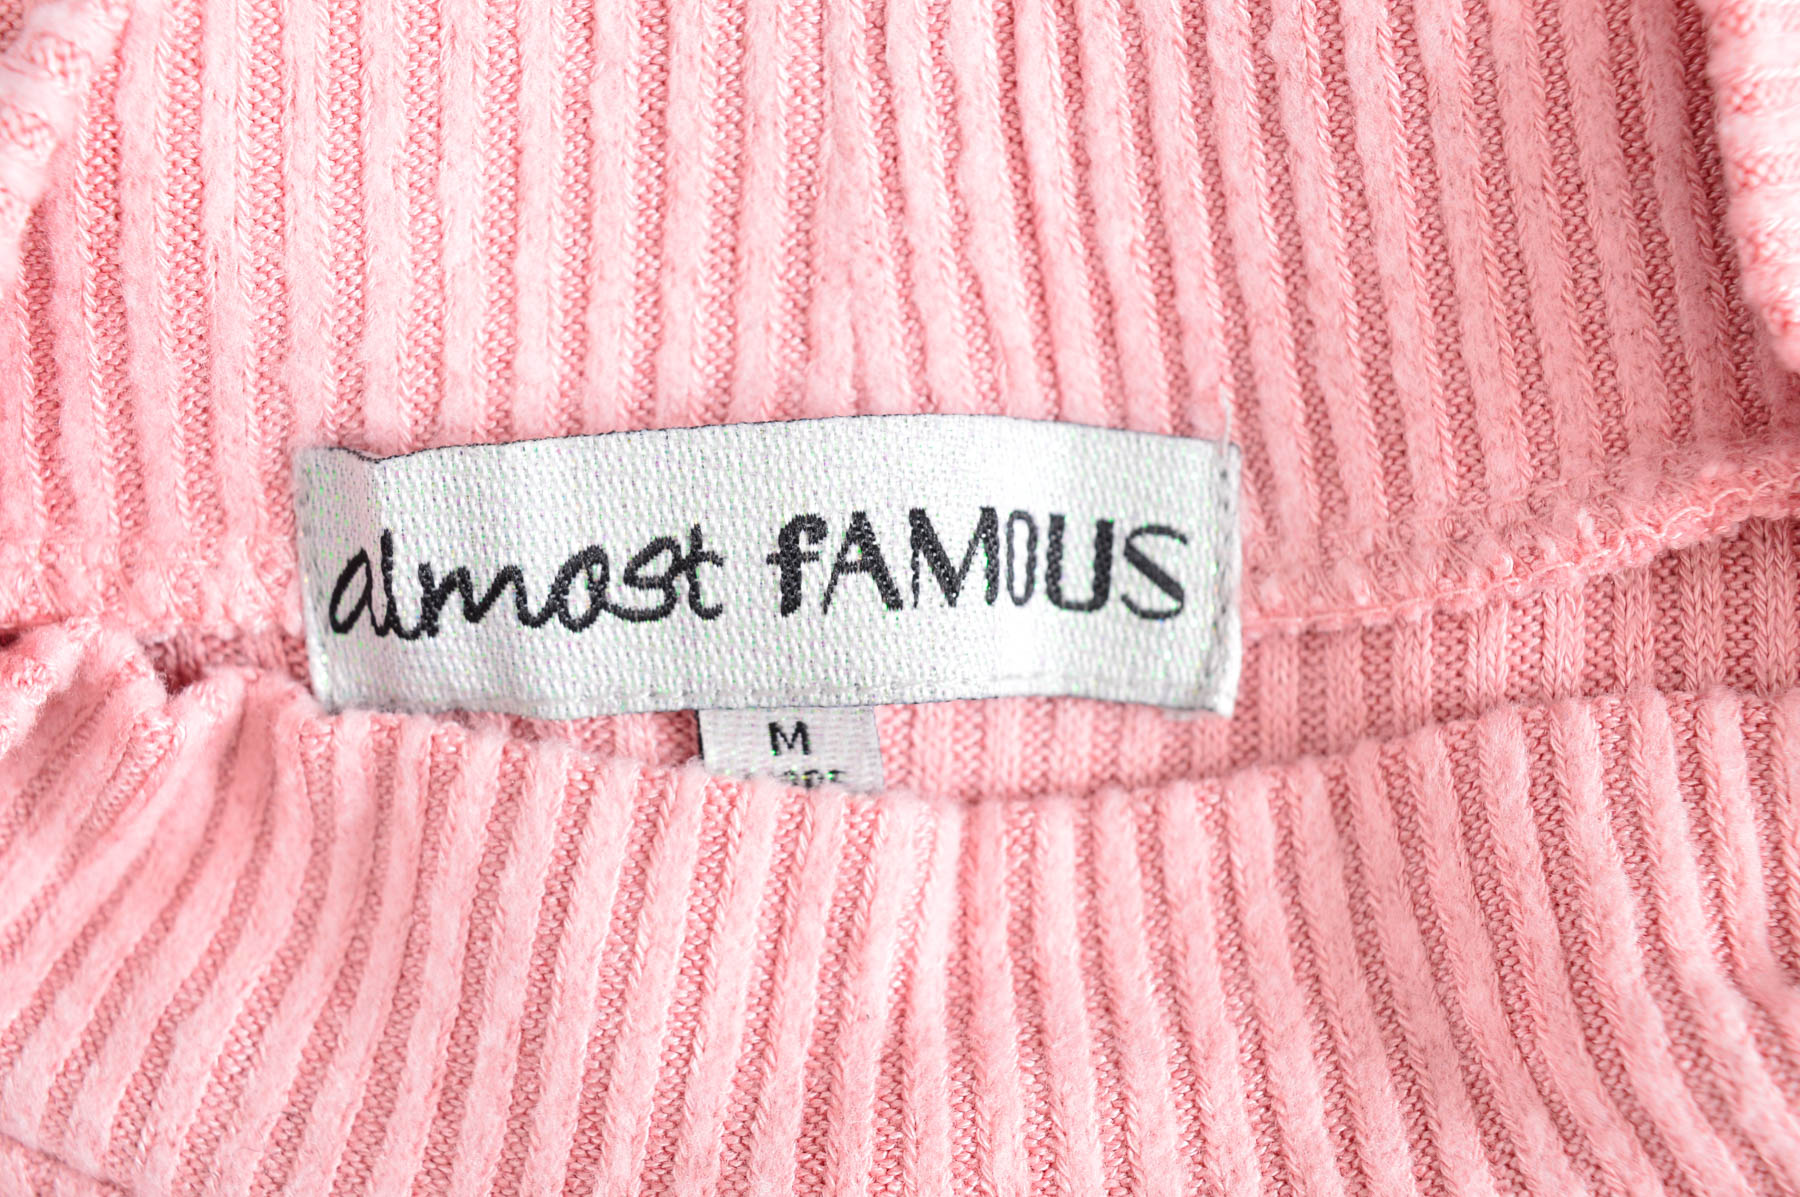 Women's sweater - Almost Famous - 2